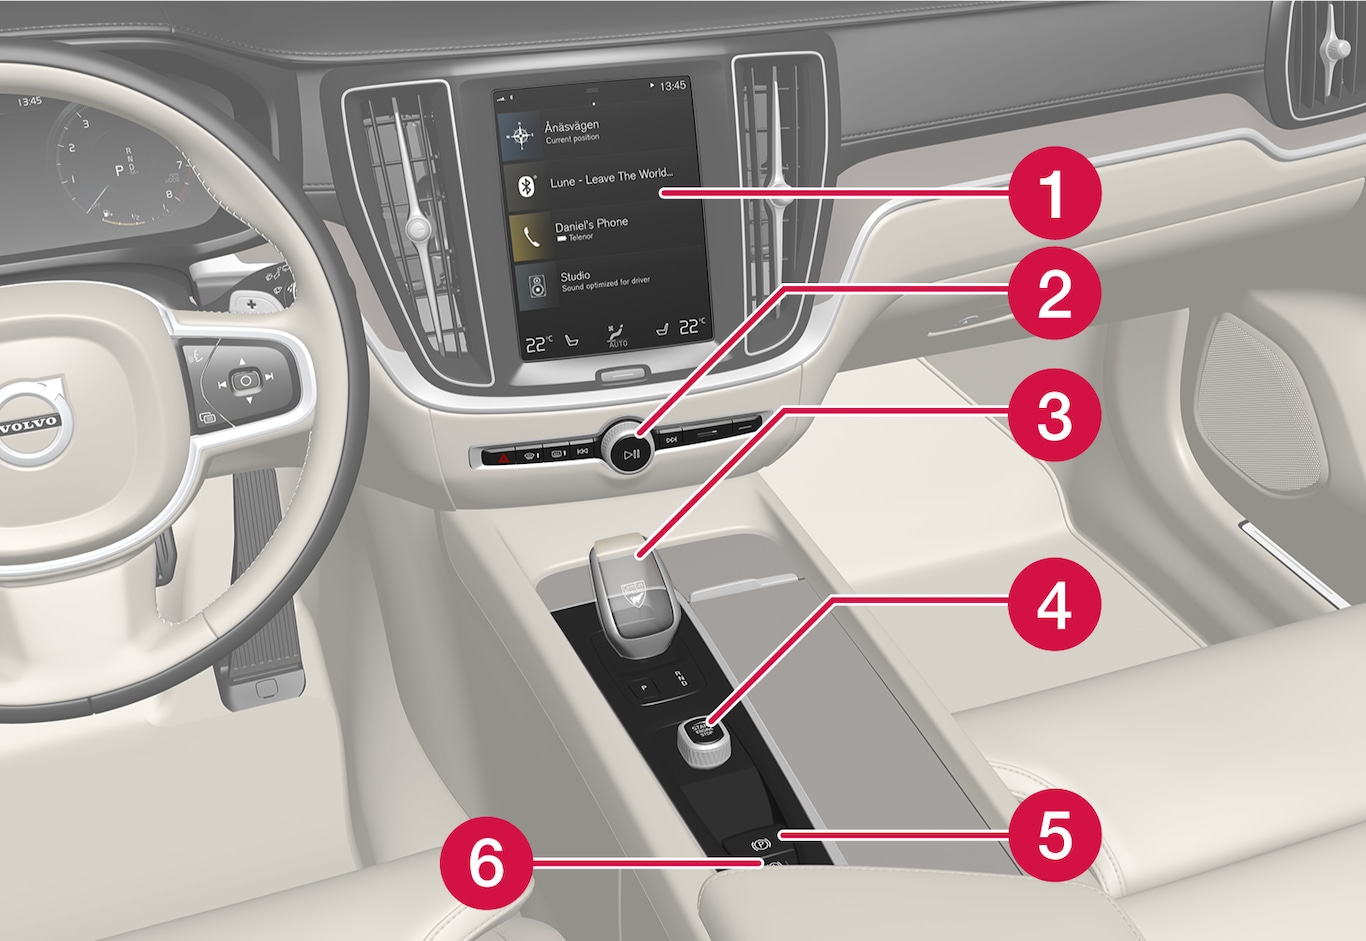 P5-21w22-S/V/XC60-Controls in tunnel and center console, left hand drive